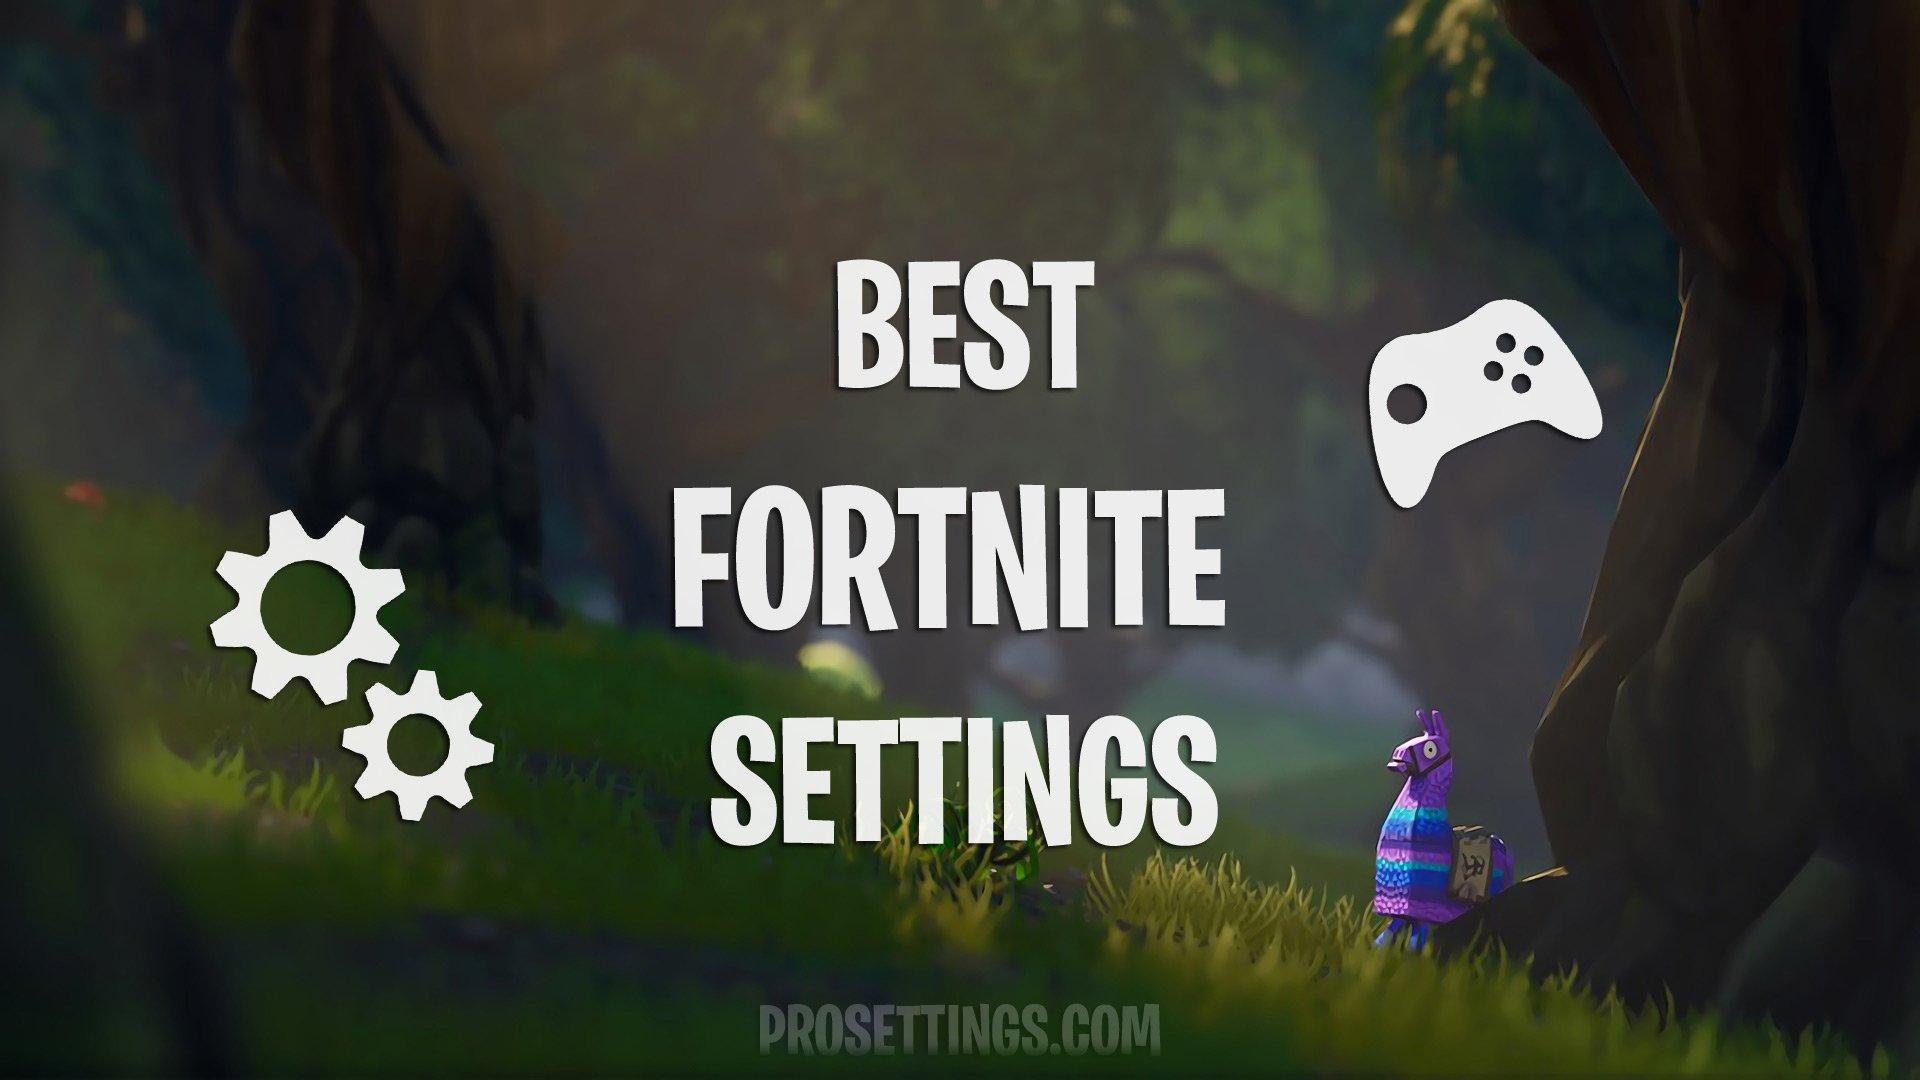 best fortnite settings - best way to play fortnite on the go